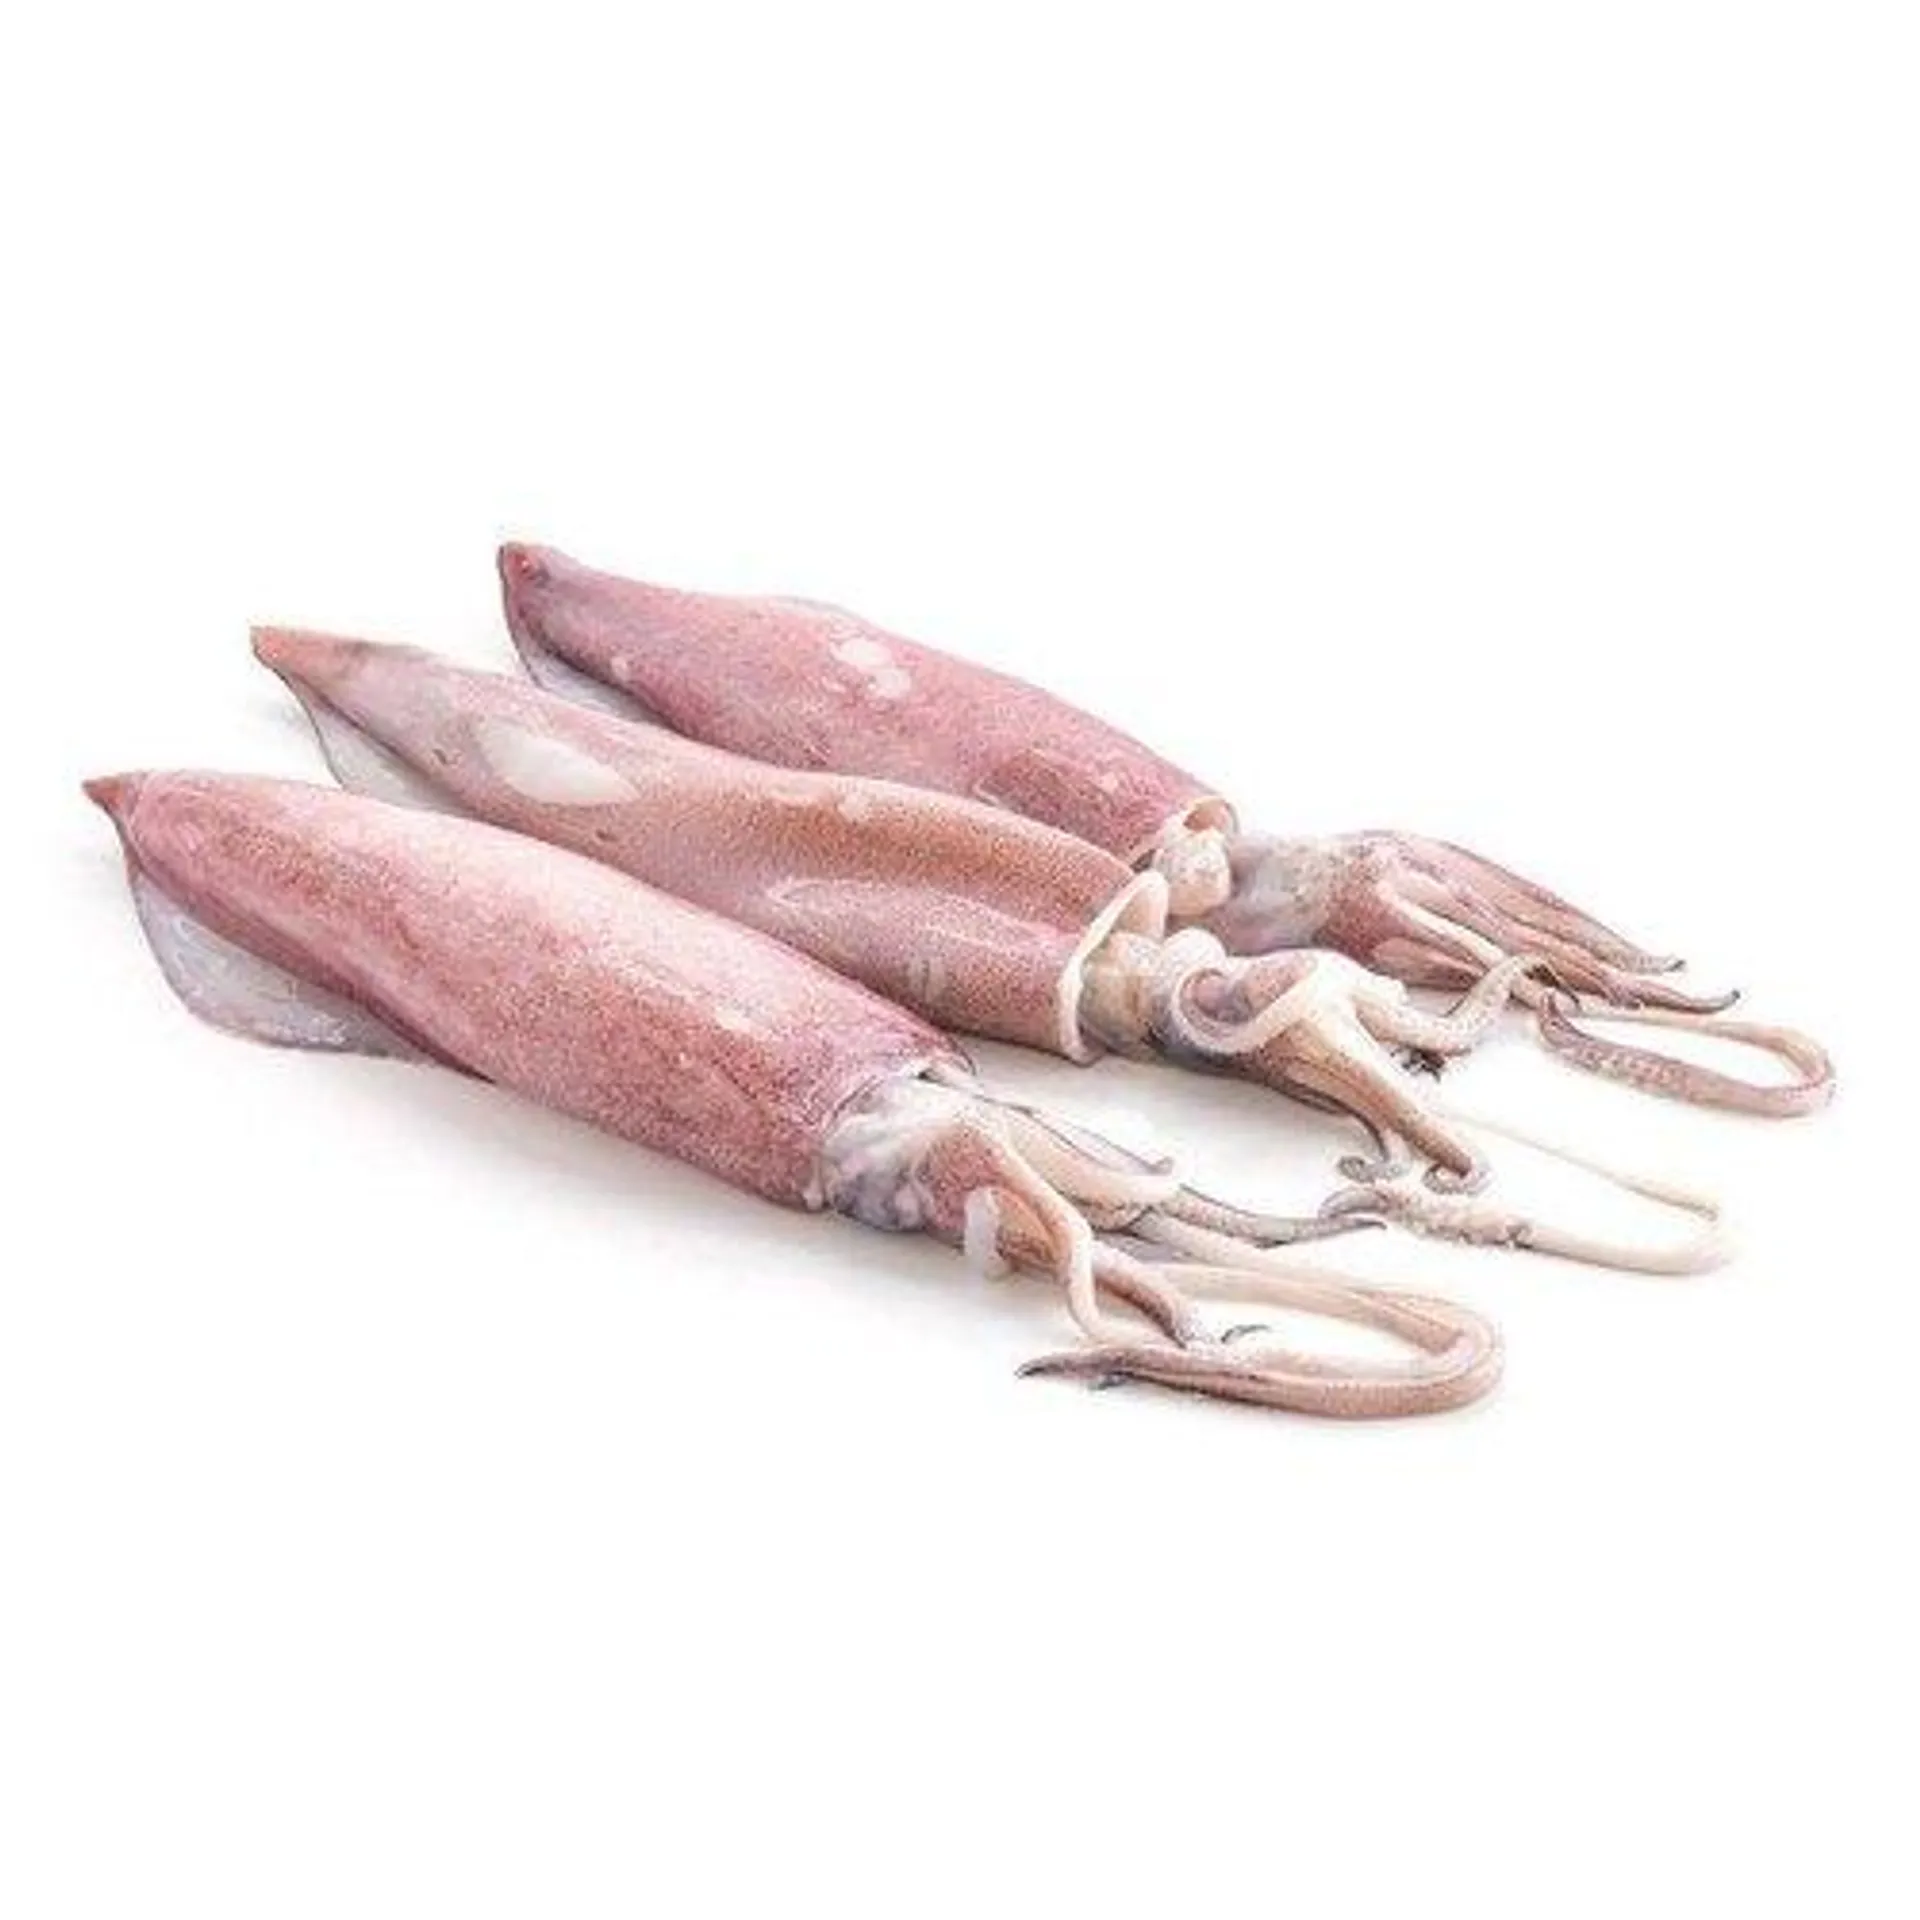 Delicious Flame Squid 500g